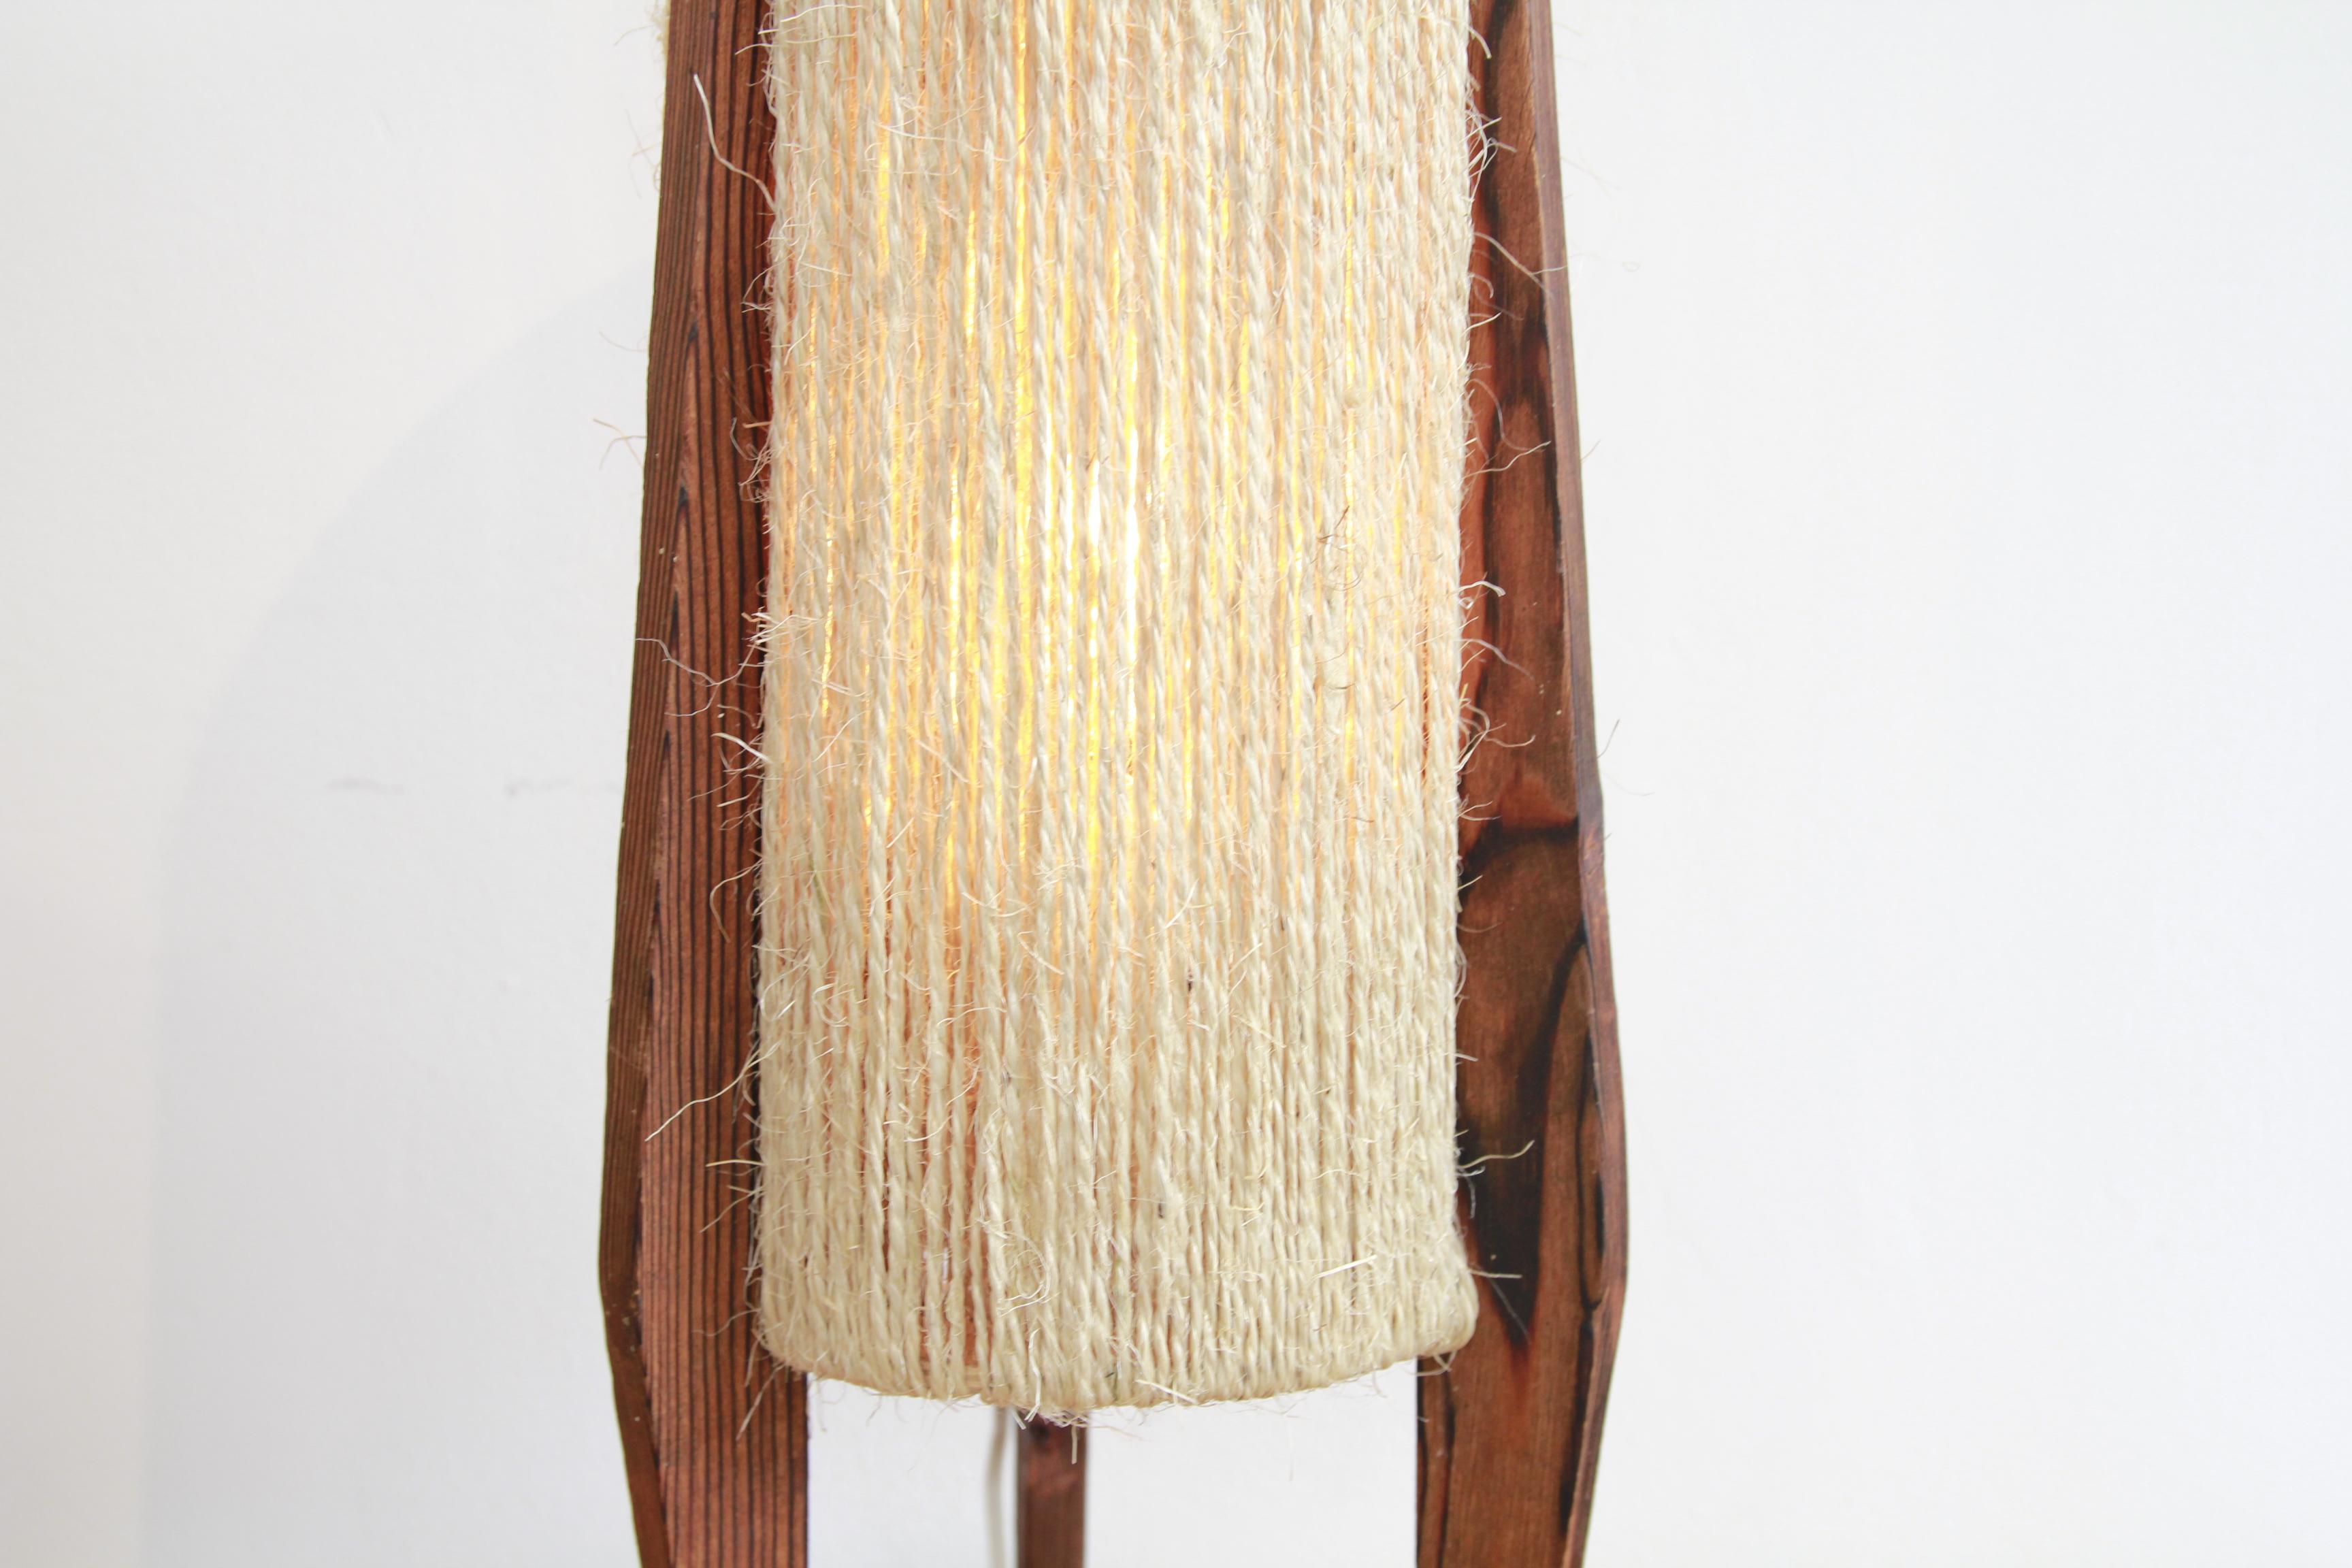 Japonisme Vintage Tripod Rocket Table Lamp in Pine and Sisal Rope, Denmark, 1960s